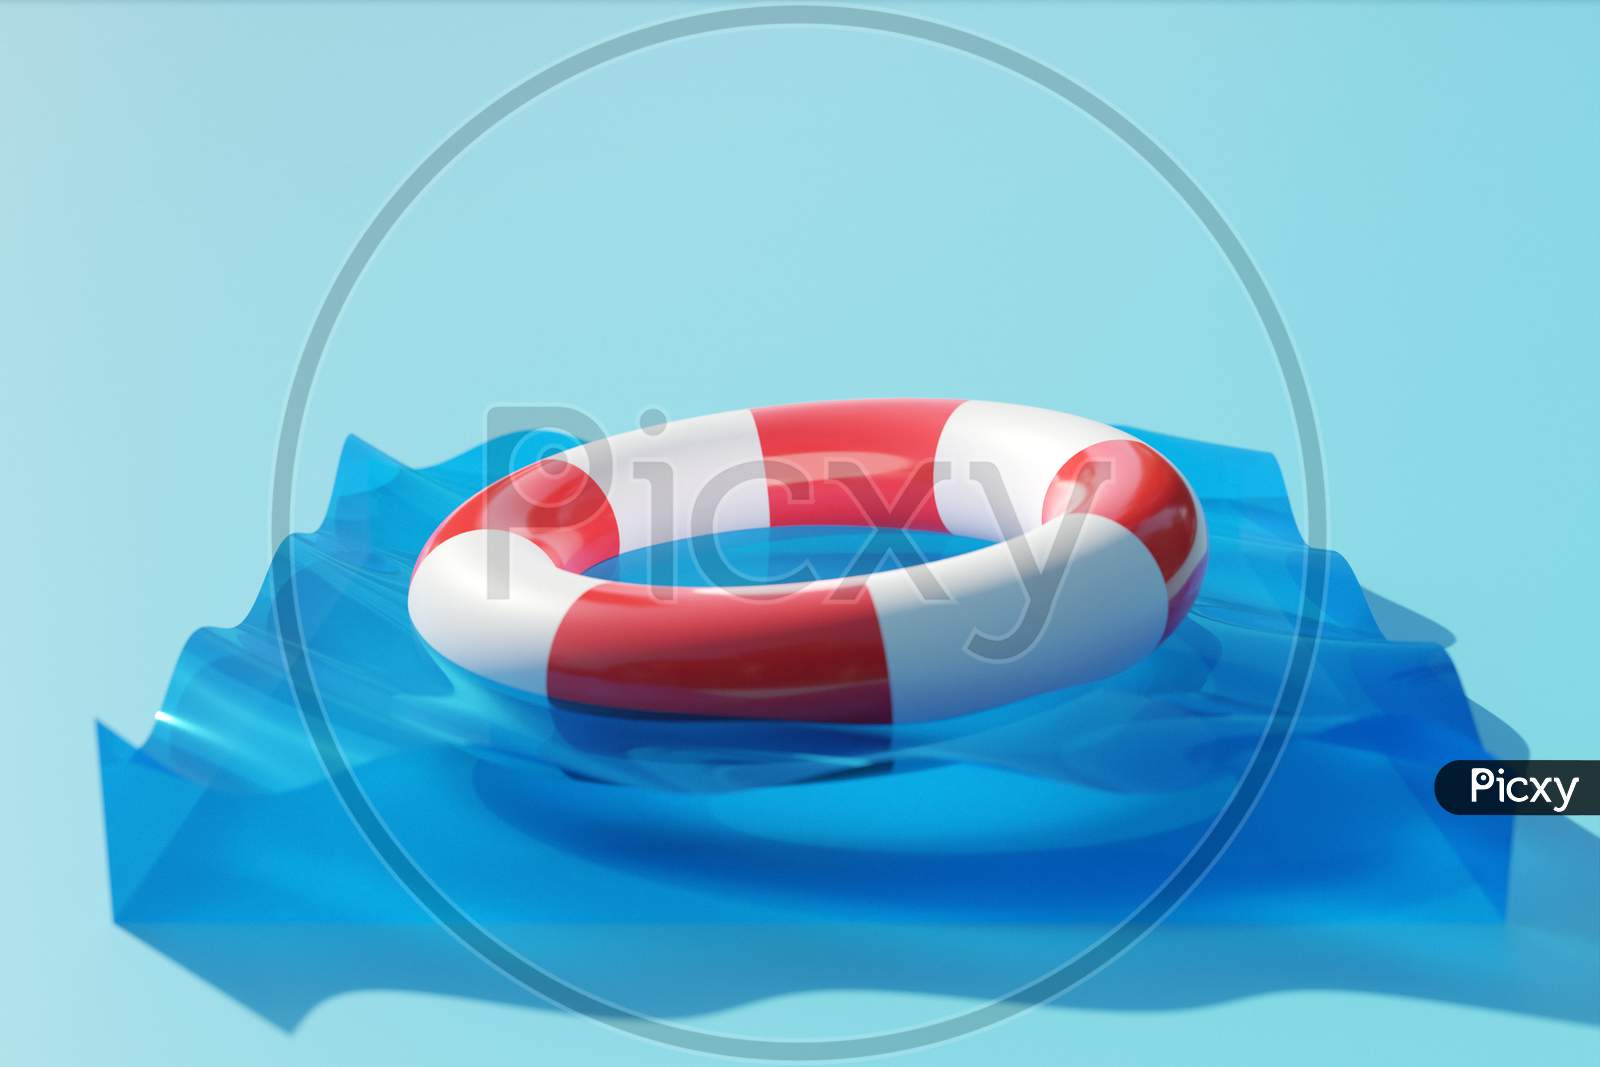 3D Illustration Of A White And Red Lifebuoy Floats In The Clear Water. Emergency Lifebuoy In The Water. Saving Lives. Summer Background